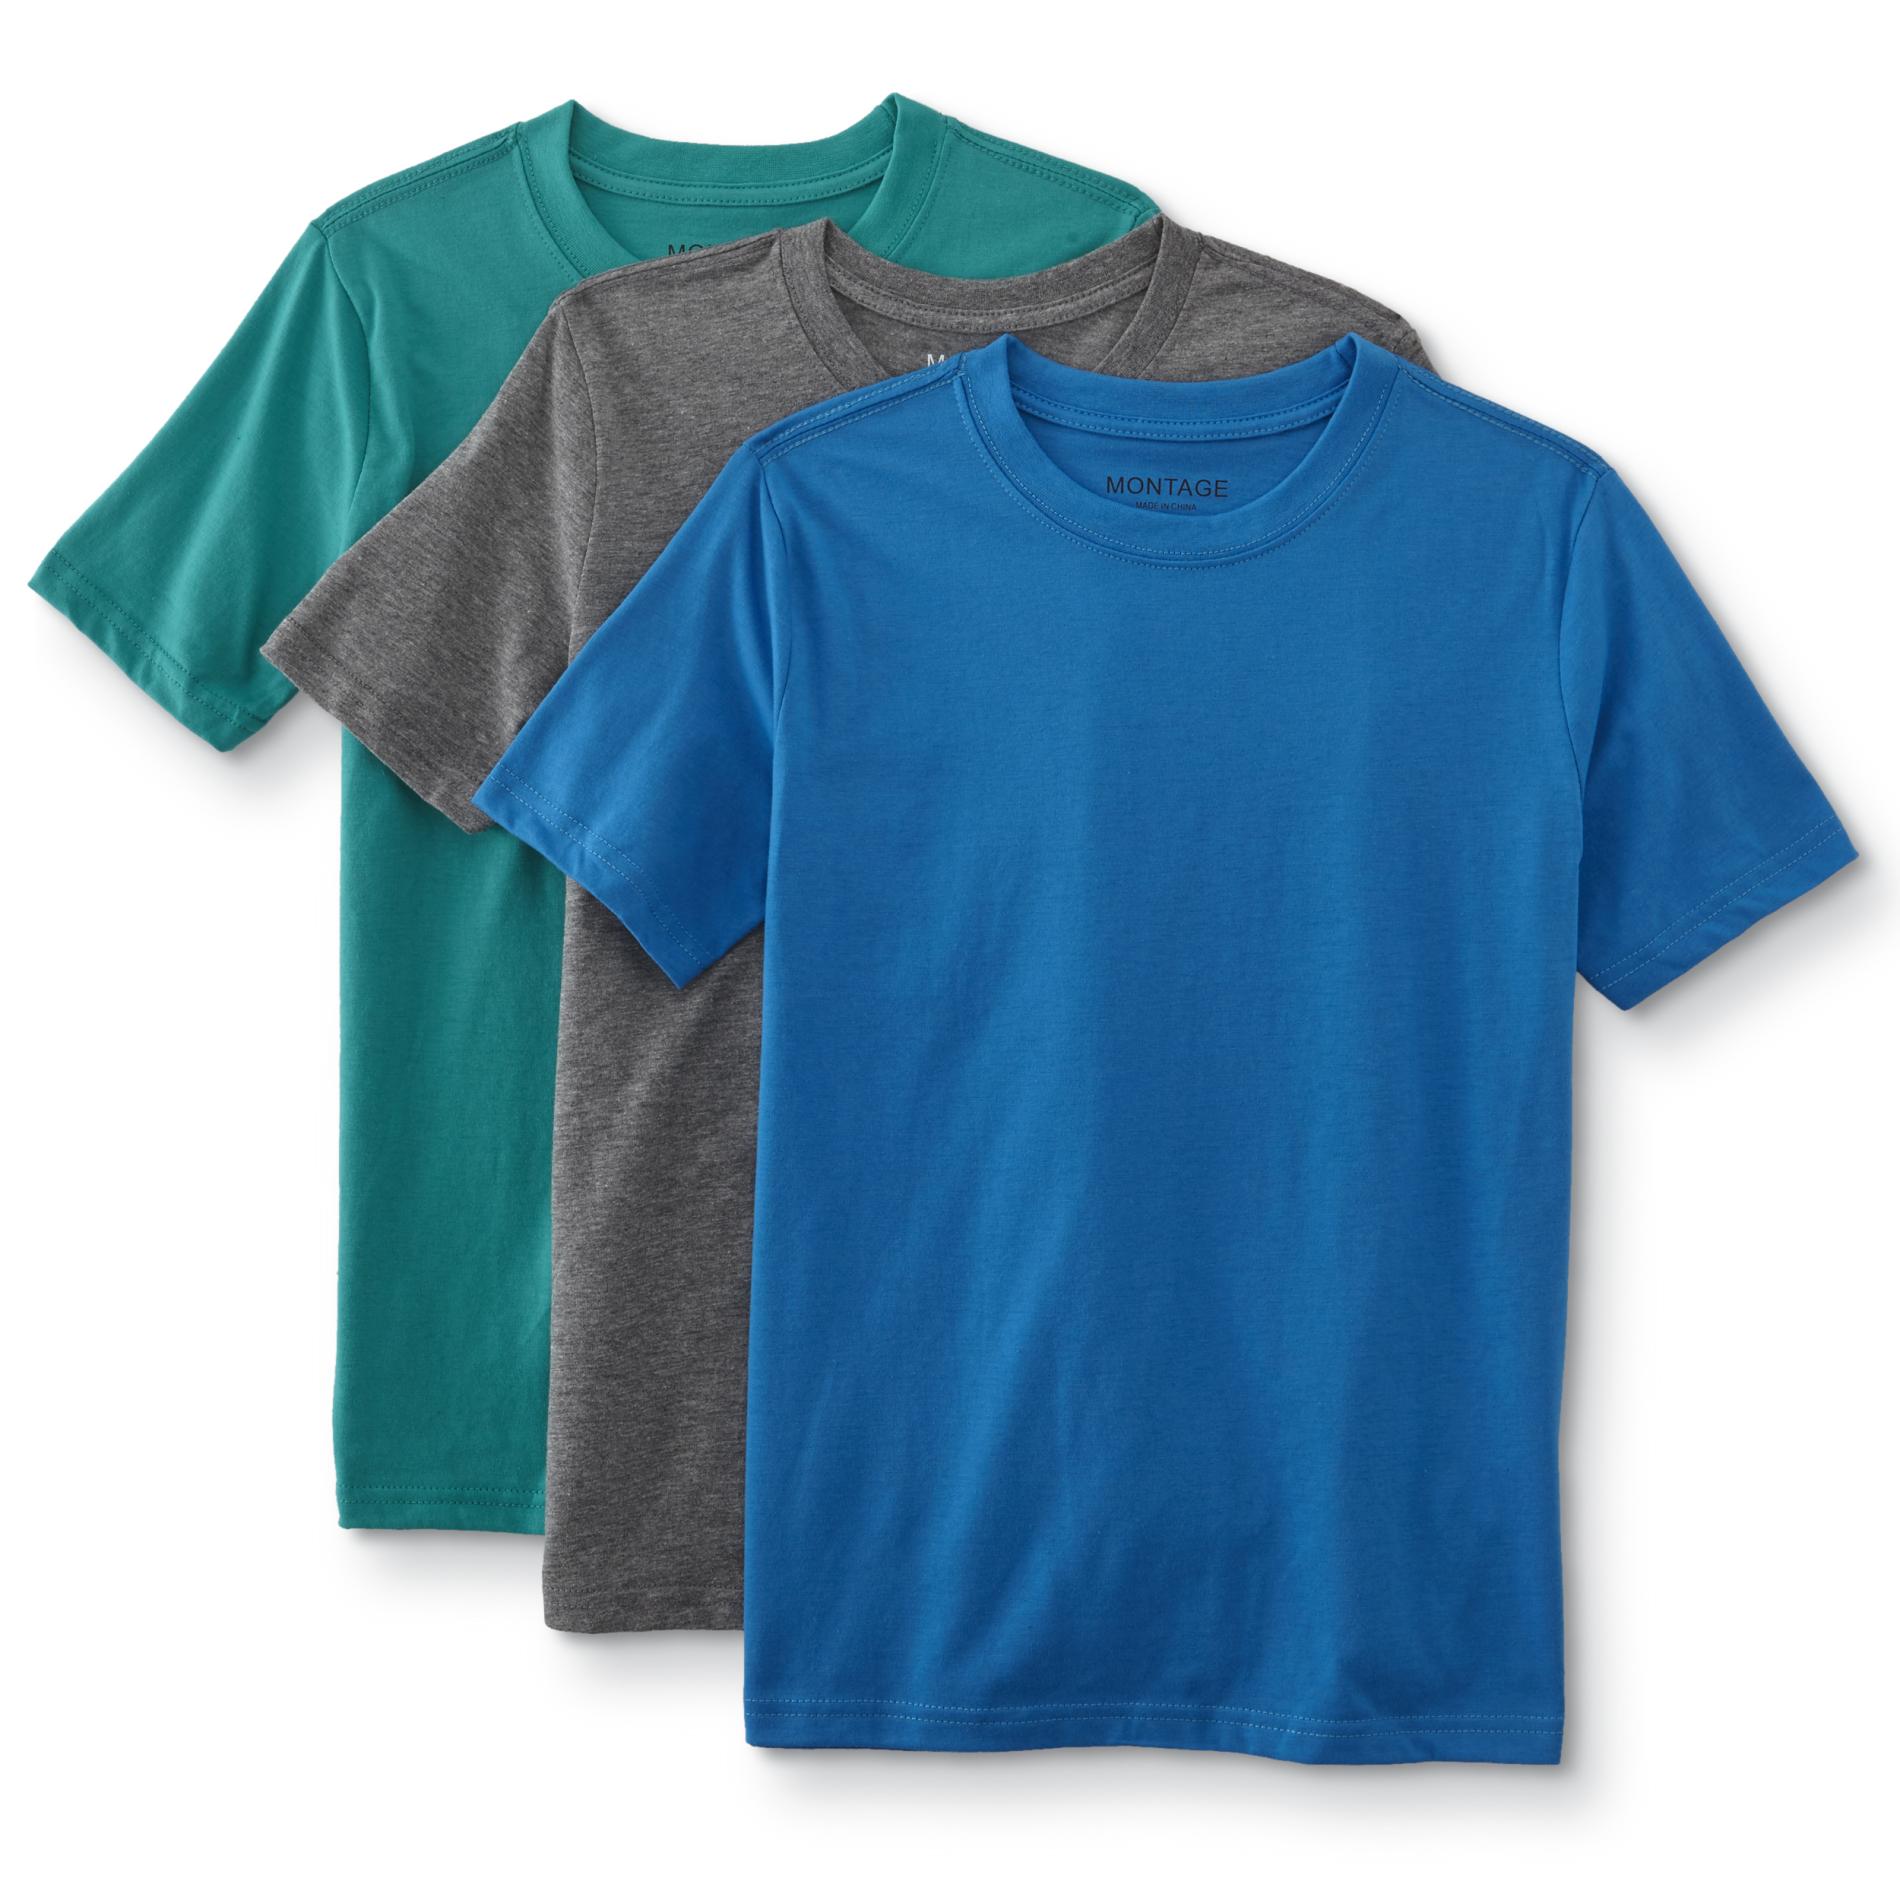 Montage Boys' 3-Pack T-Shirts